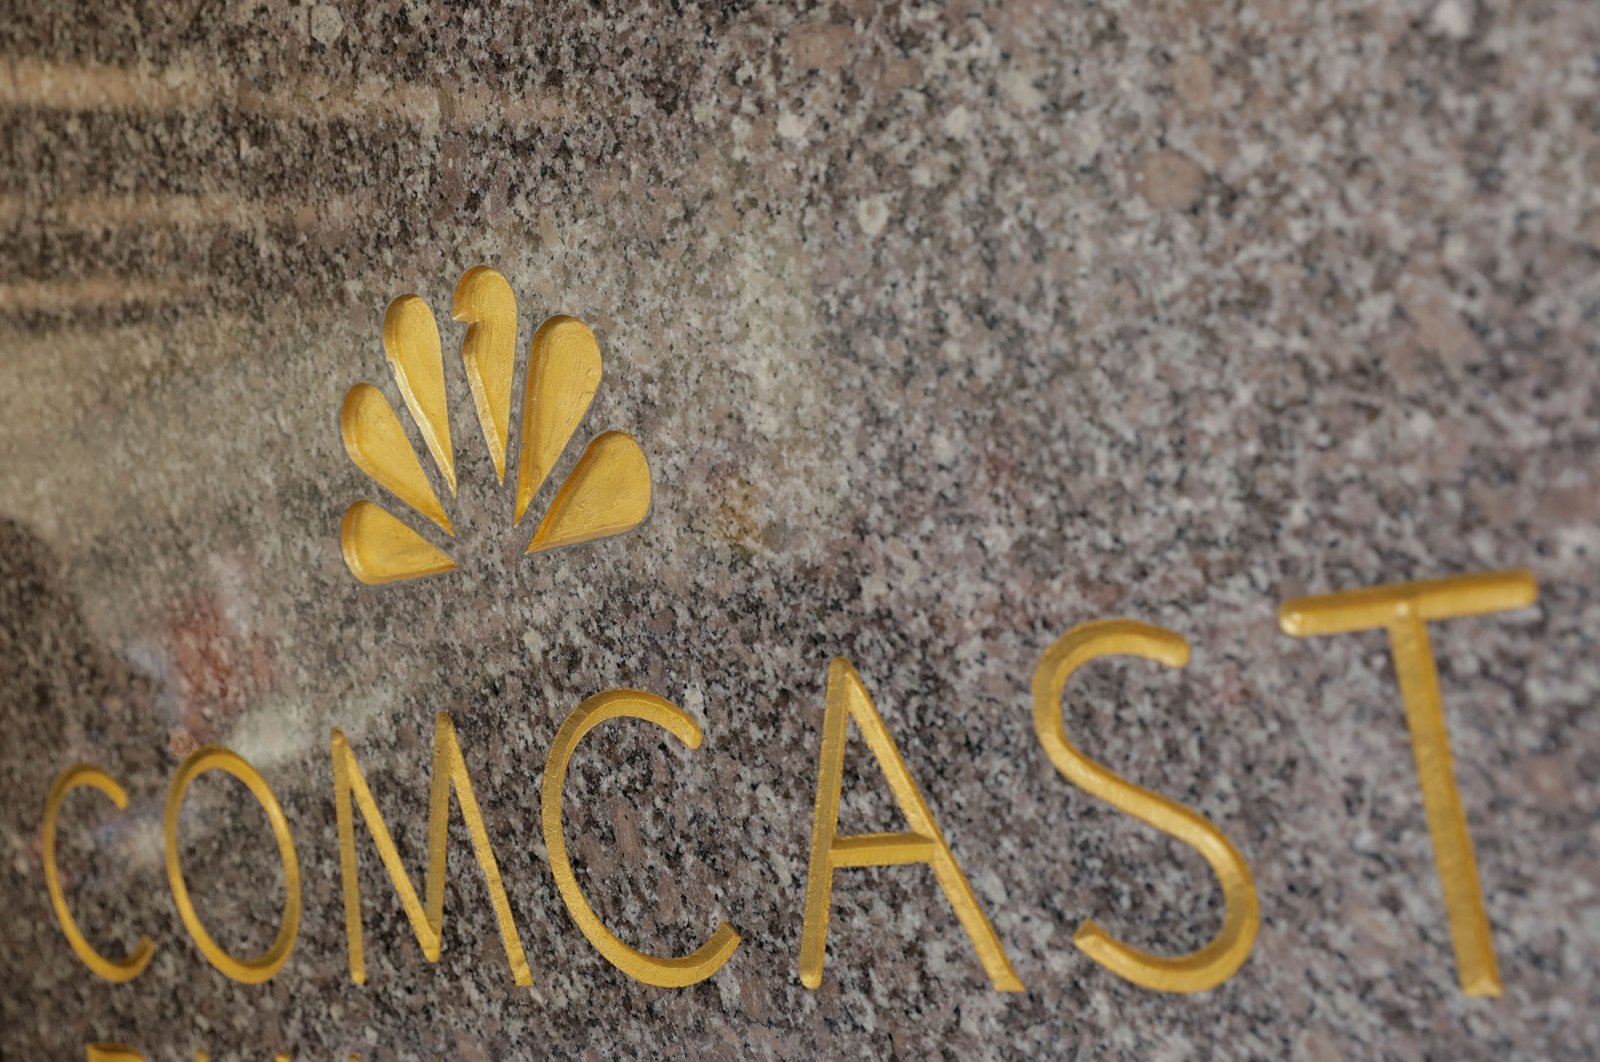 The NBC and Comcast logos are displayed on 30 Rockefeller Plaza in midtown Manhattan in New York, U.S., Feb. 27, 2018. (Reuters Photo)